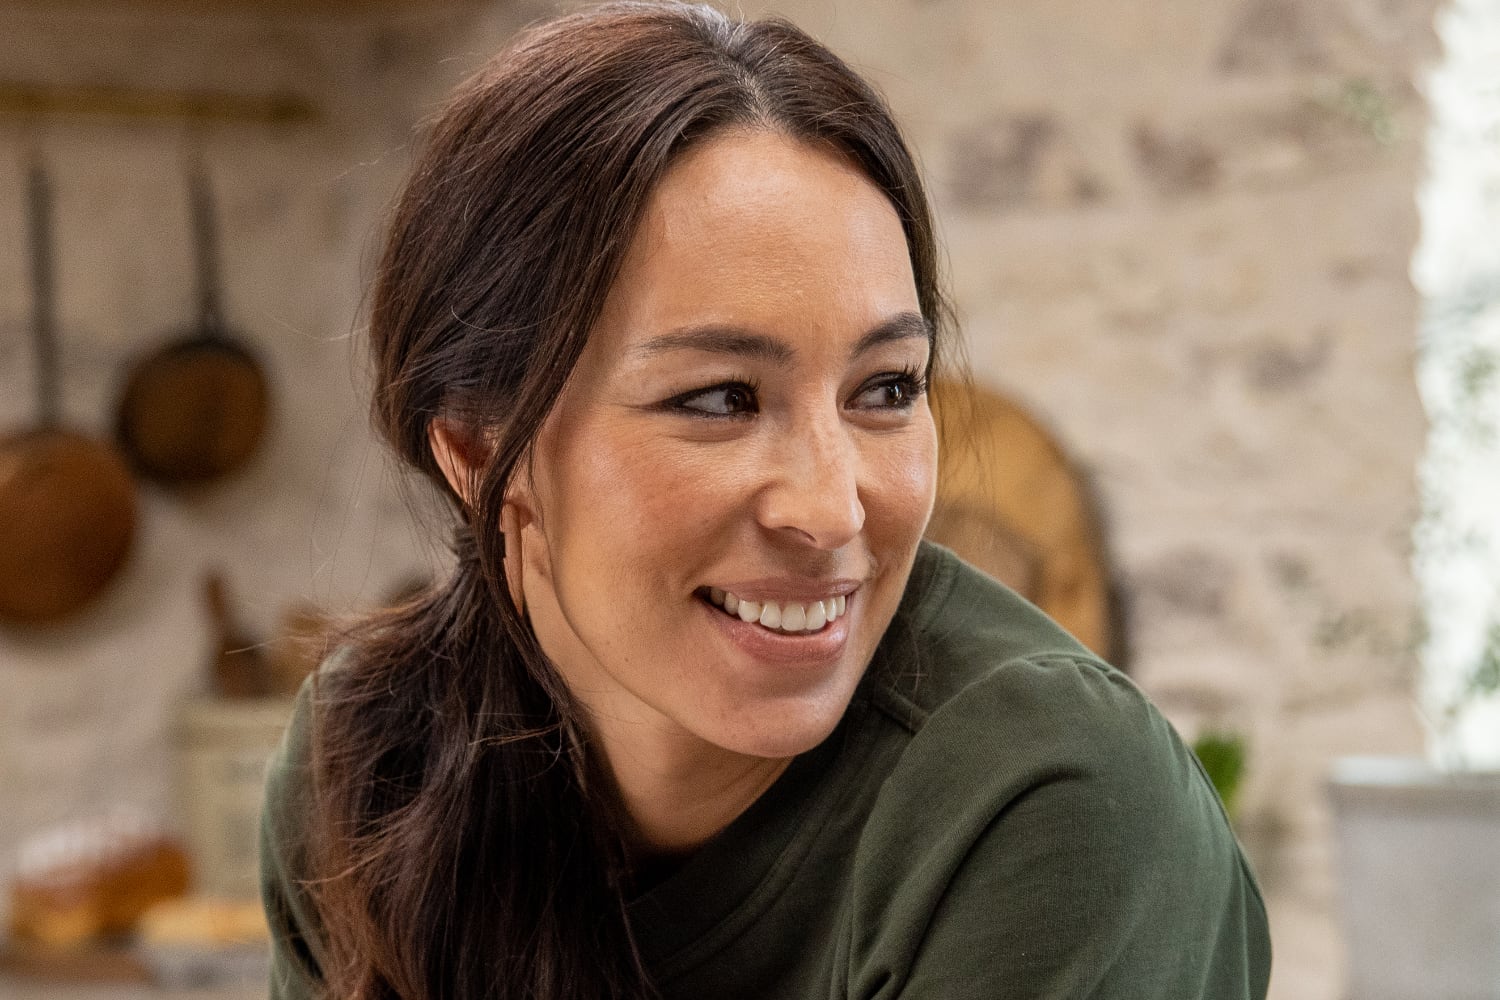 Joanna Gaines Invites Her Family to ‘Magnolia Table’ and Fans Say It’s the Best Episode Yet